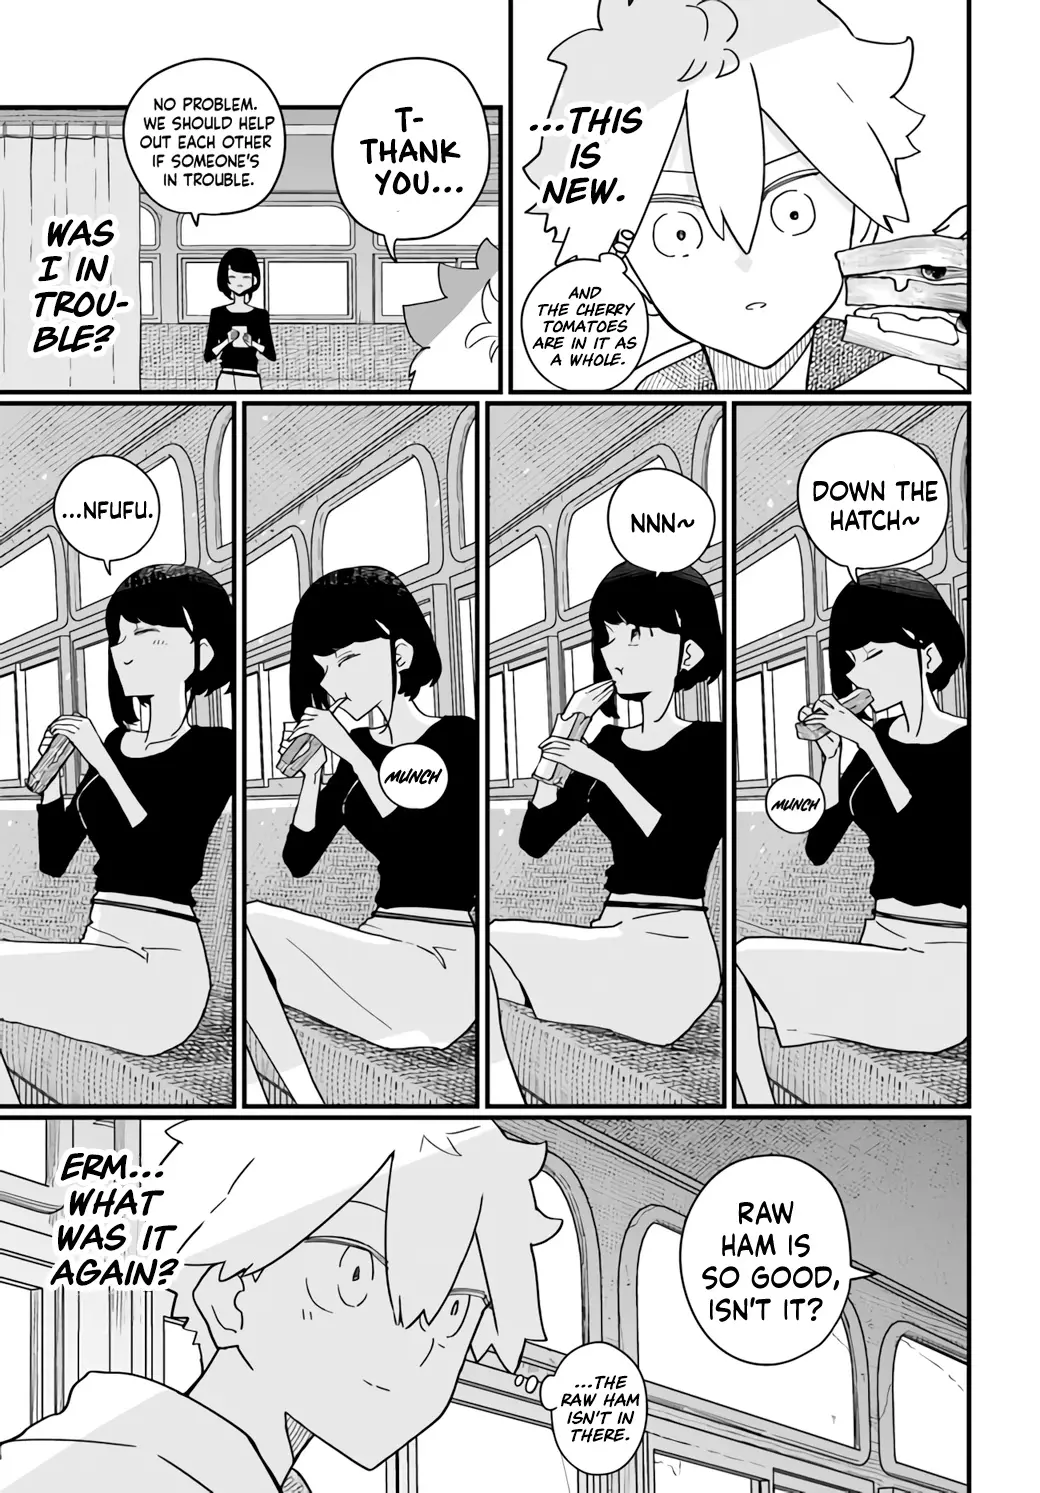 Living In An Abandoned Bus - 8 page 7-f9b9b48b